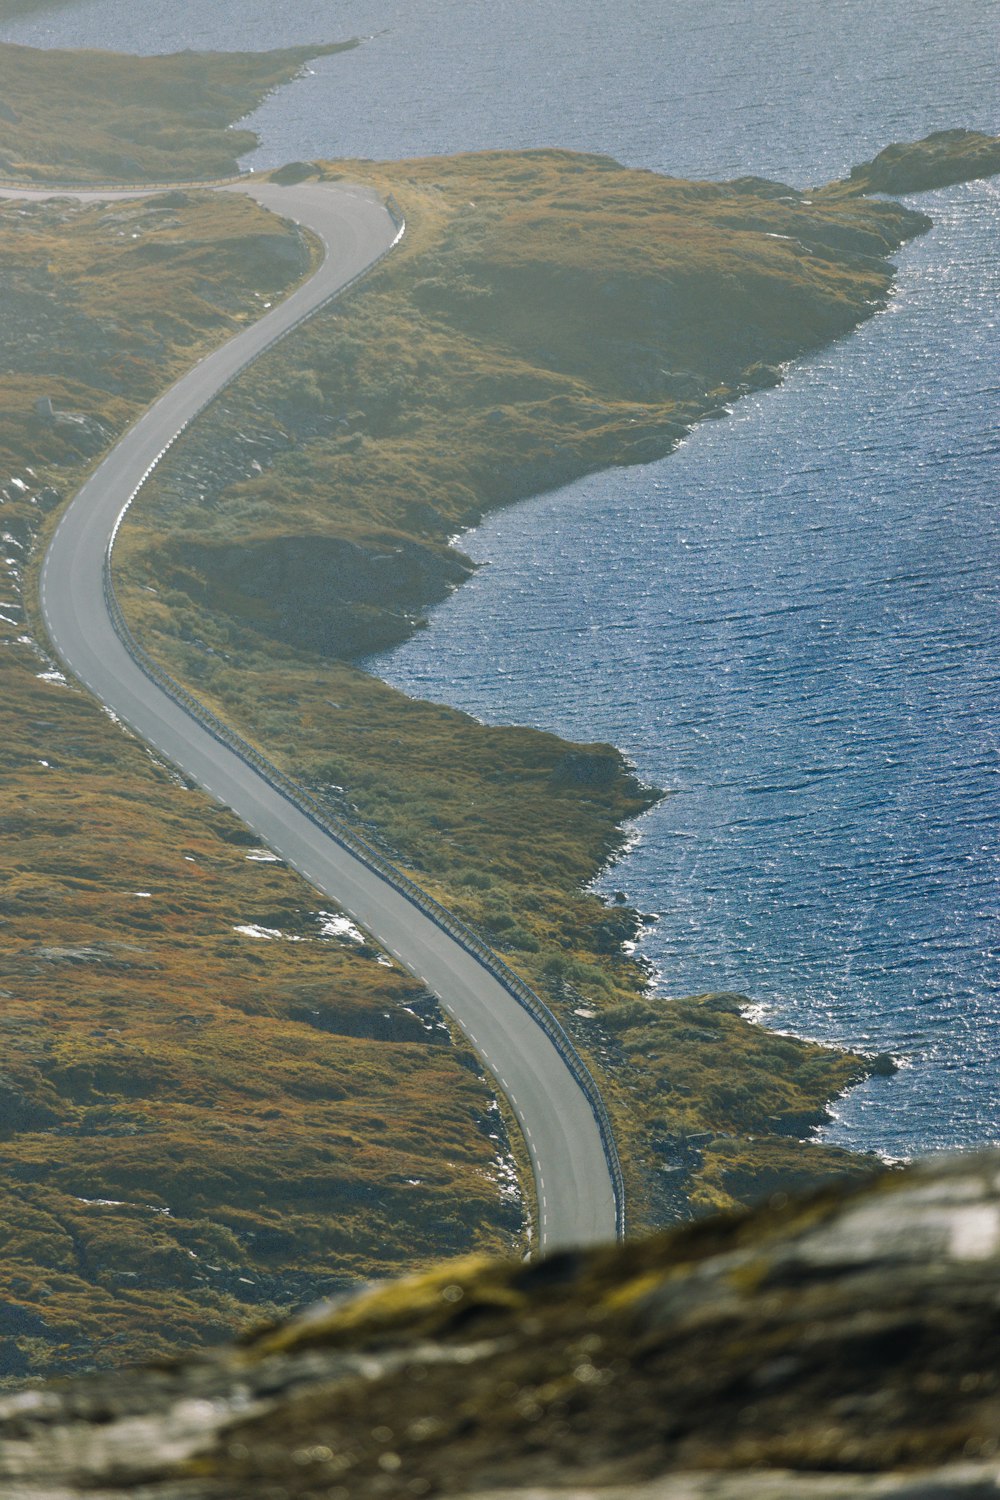 an aerial view of a winding road next to a body of water